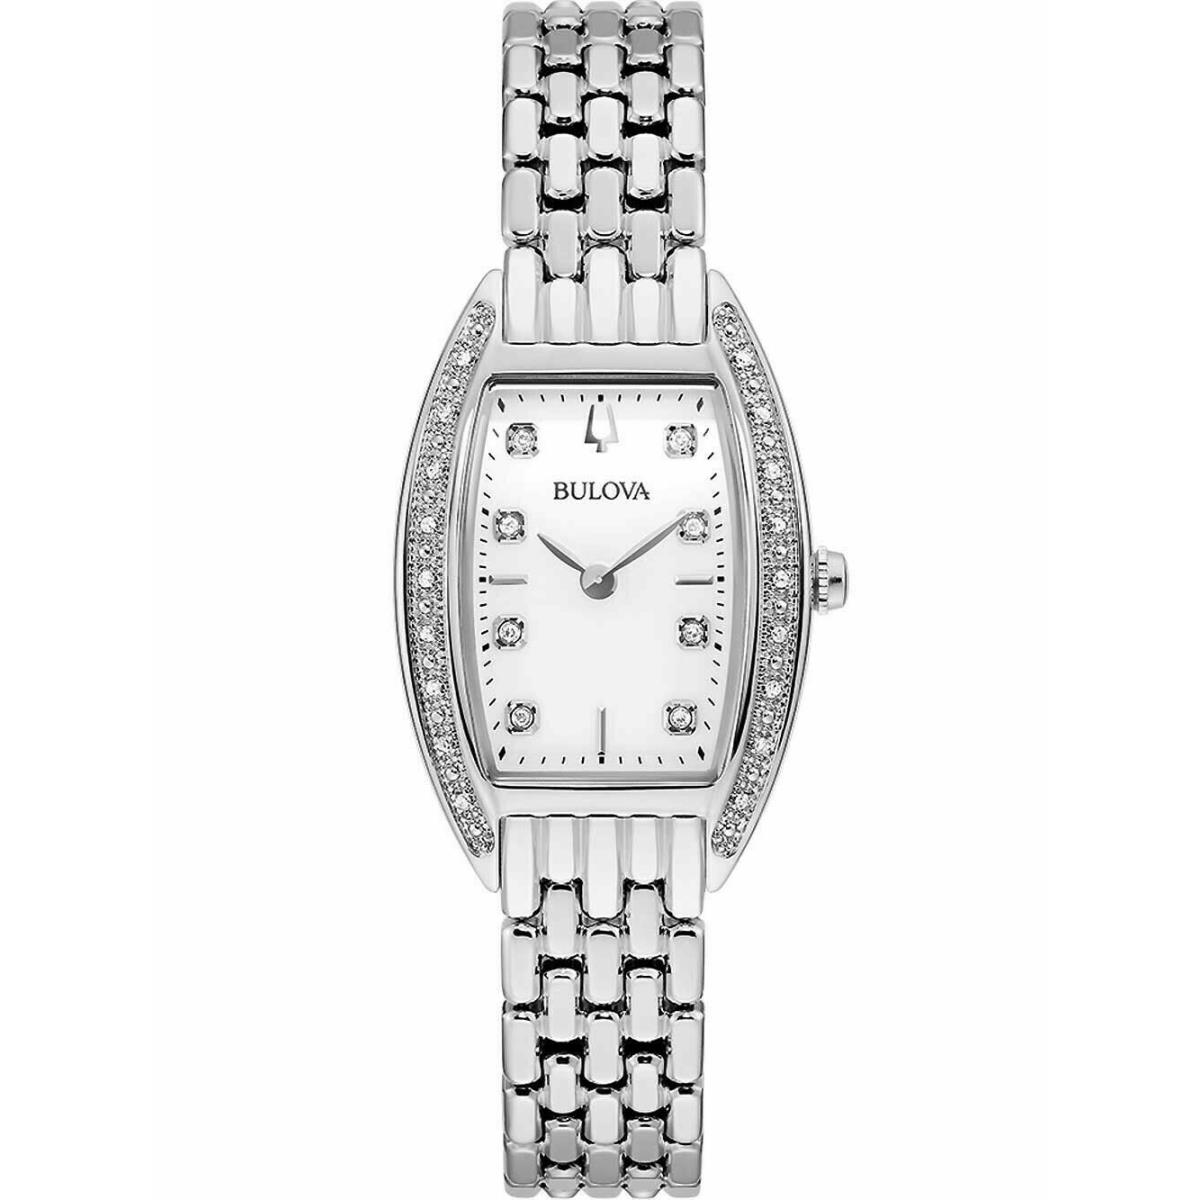 Bulova 96R244 Mother-of-pearl Dial Diamond Silver Tone Watch Great Gift